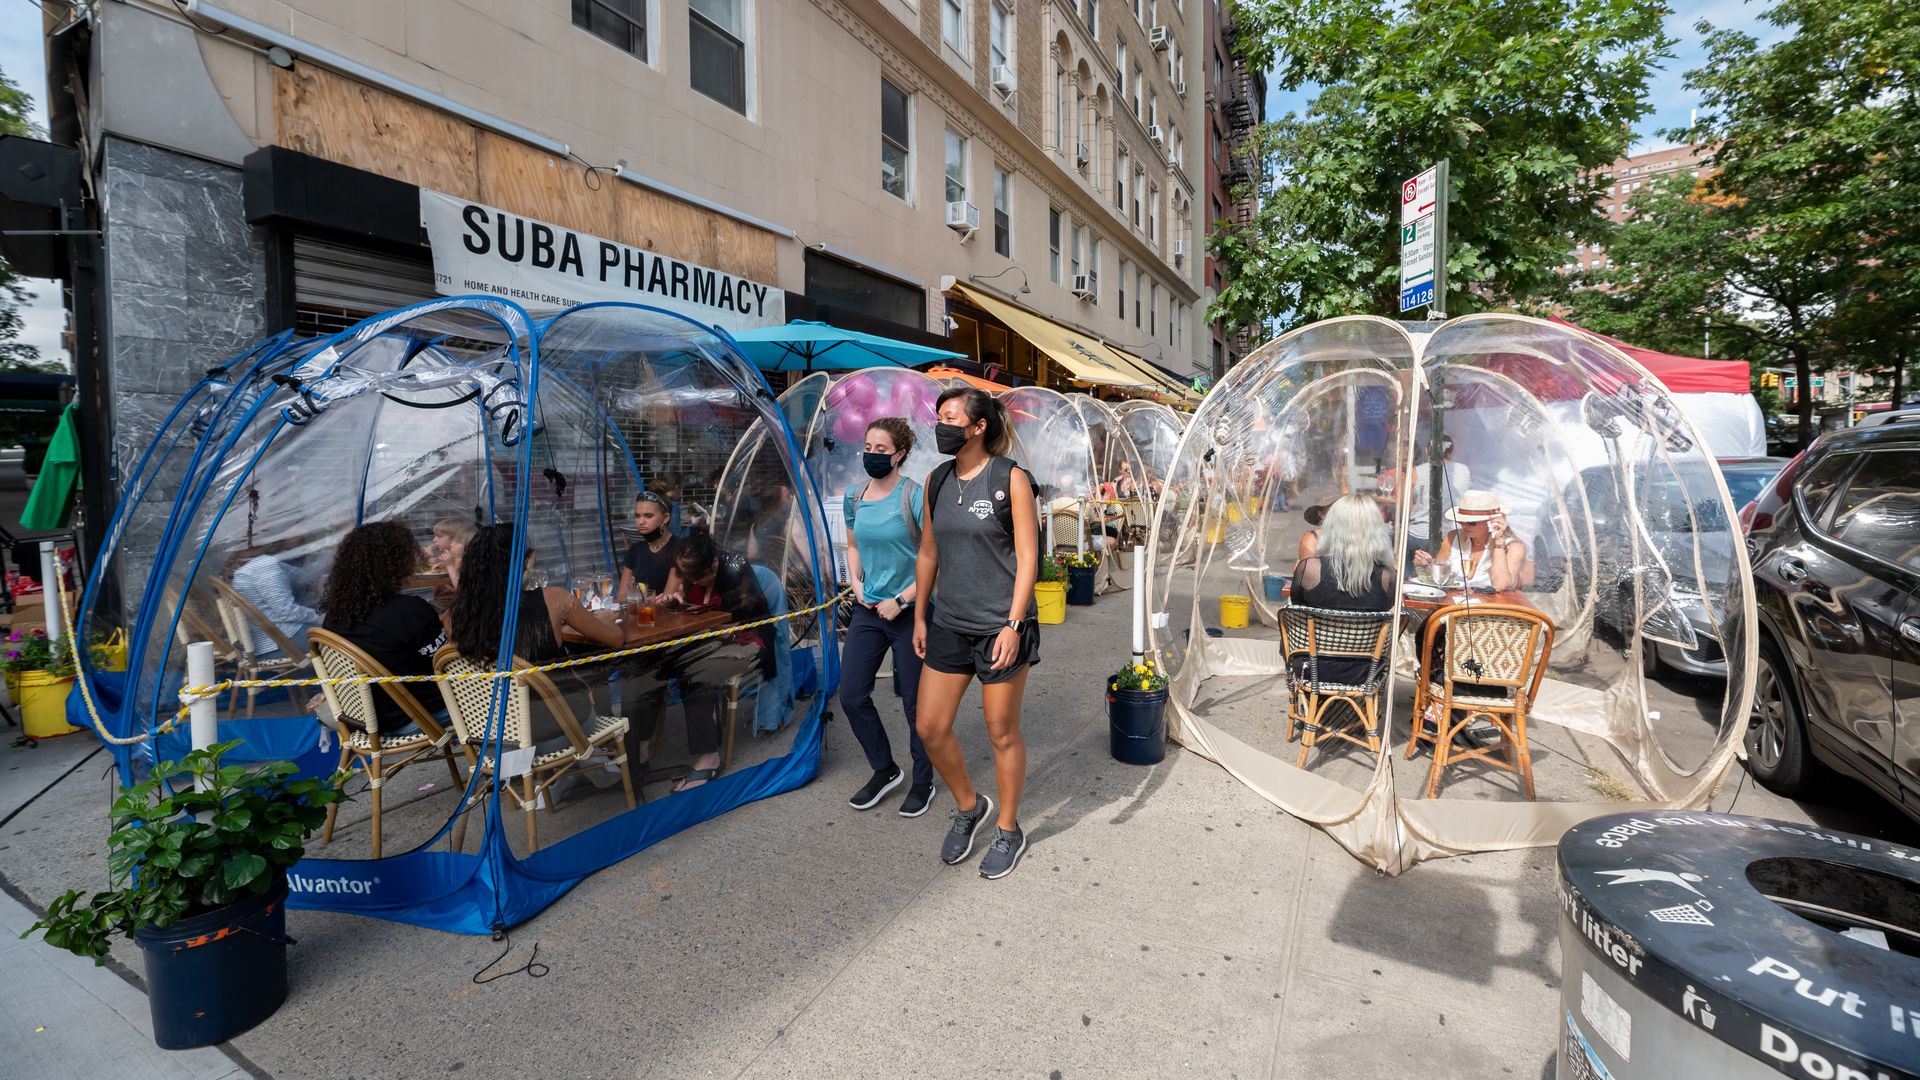 Outdoor dining in bubble-like tents in New York City amid COVID-19 restrictions